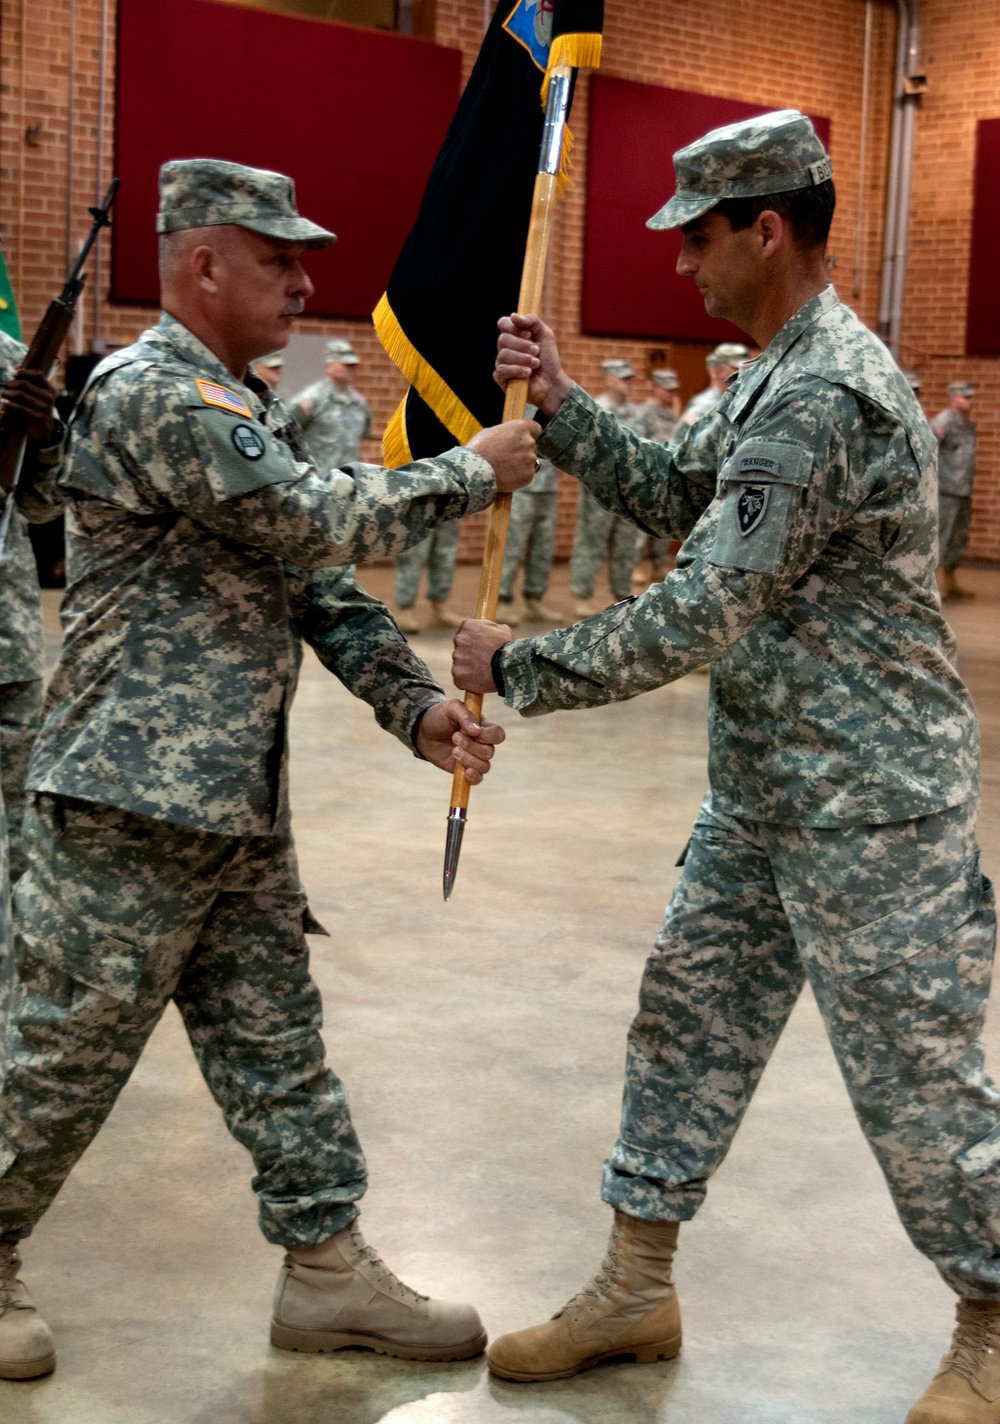 Col. Danny Mills returns to 60th Troop Command as Brigade commander